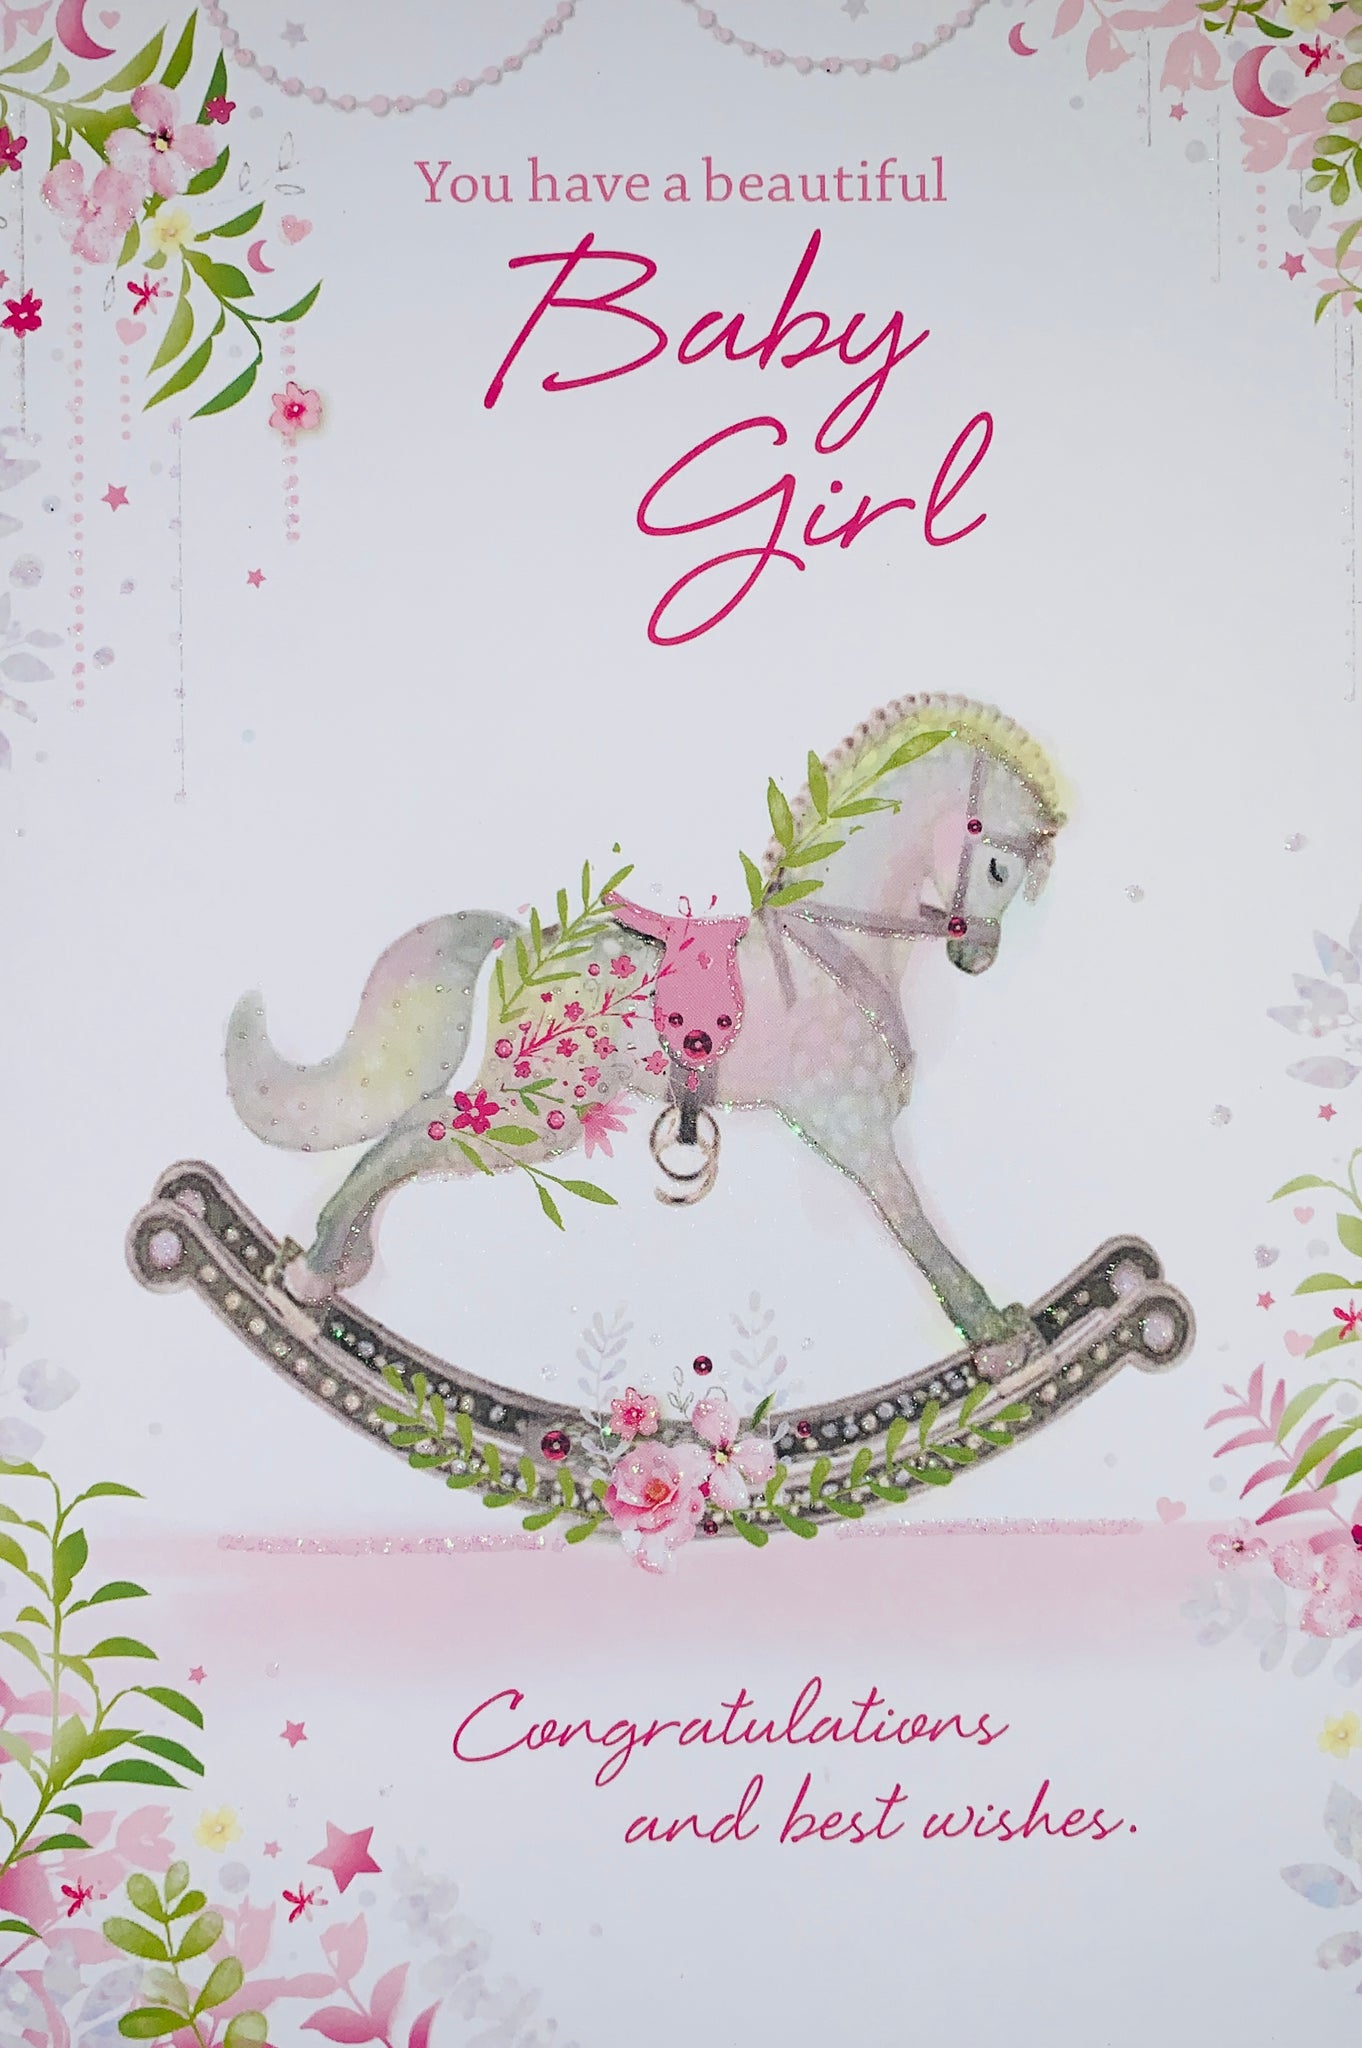 Baby girl birth congratulations card- rocking horse and flowers